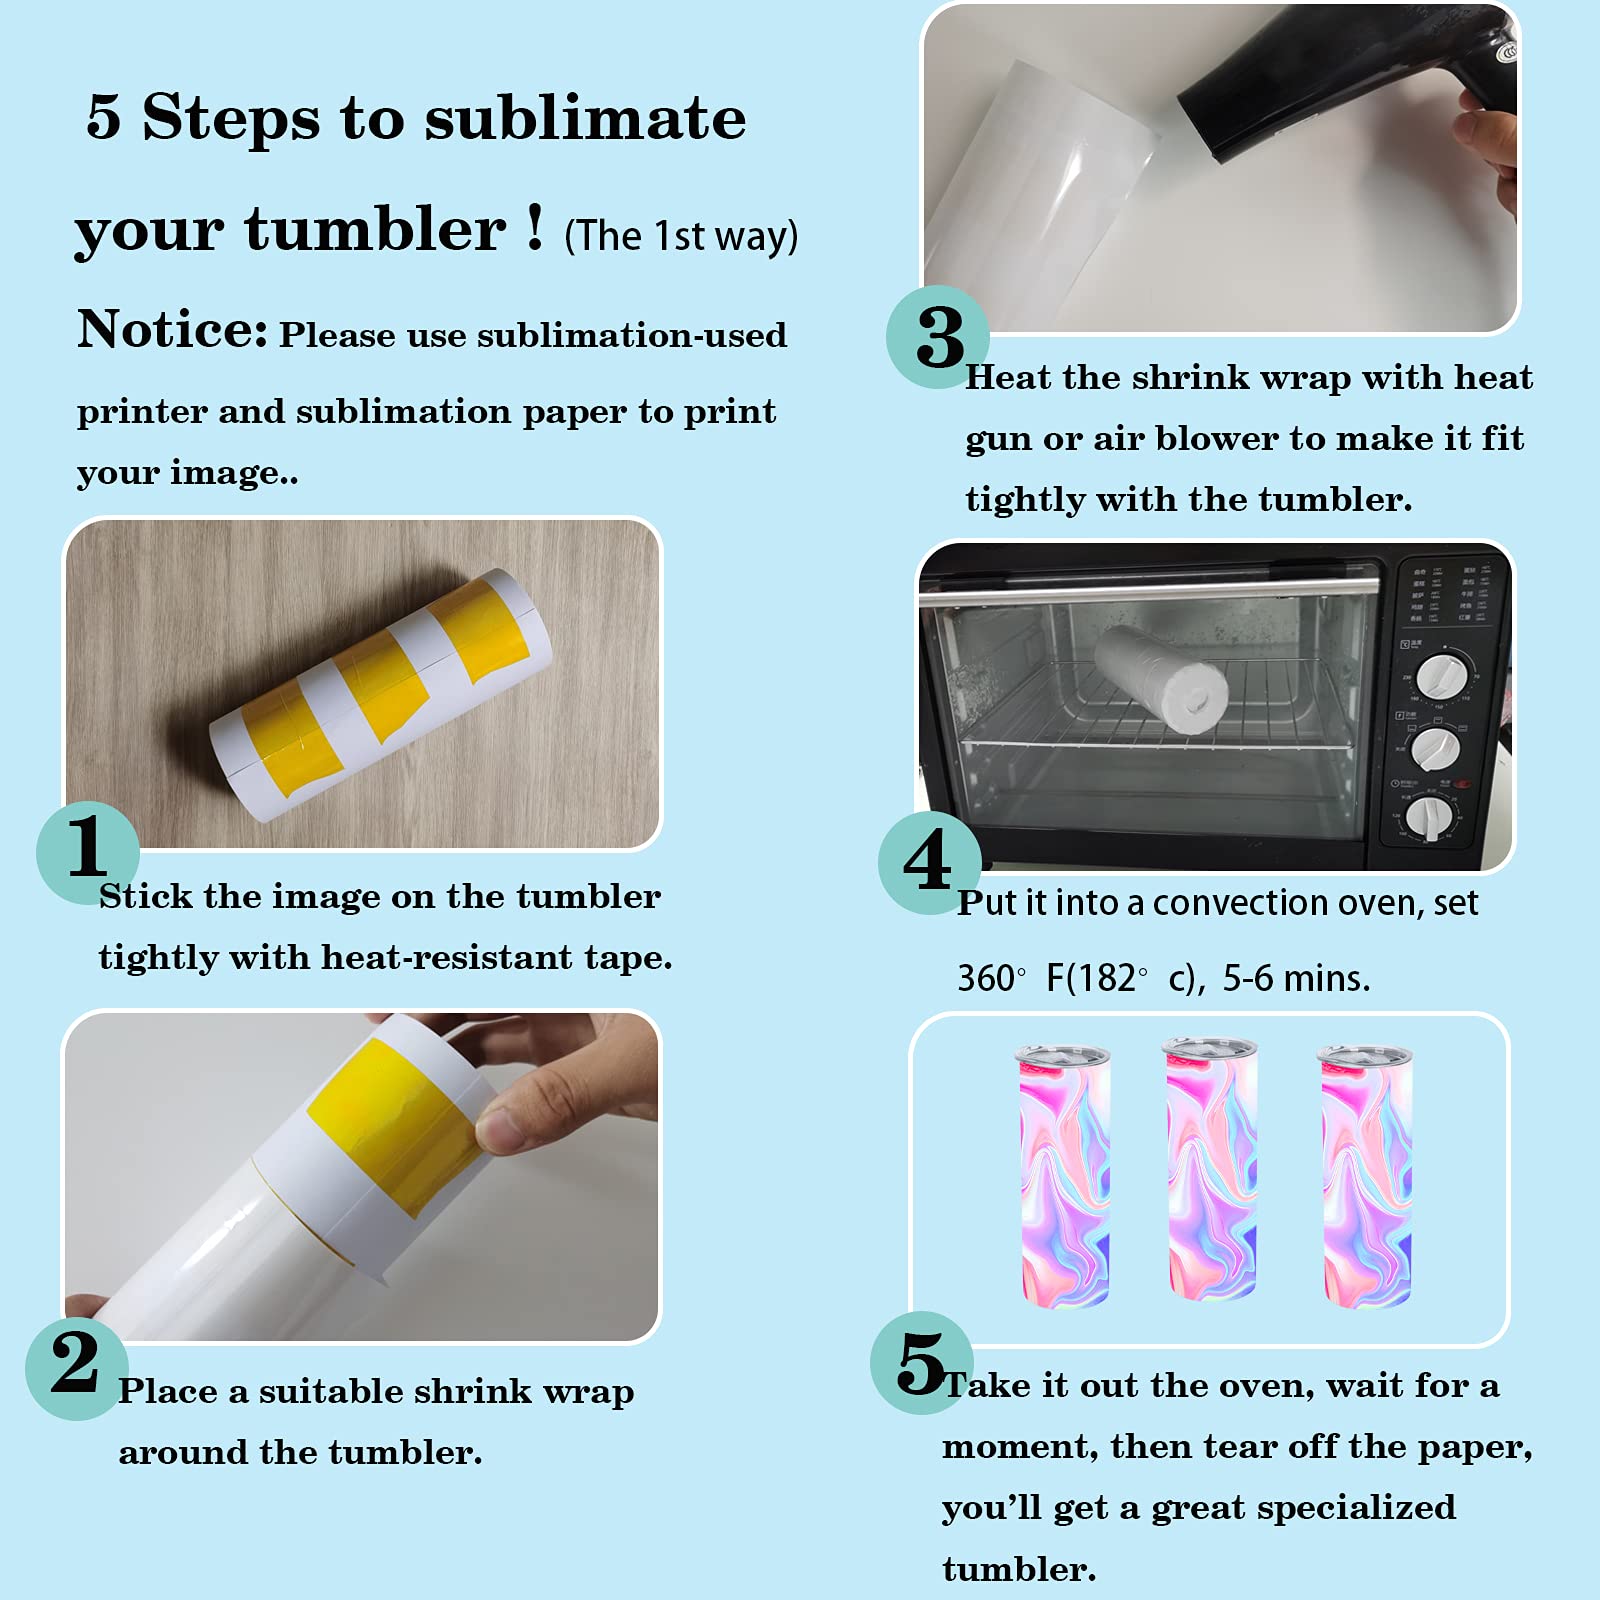 5-steps-to-sublimate-a-tumbler